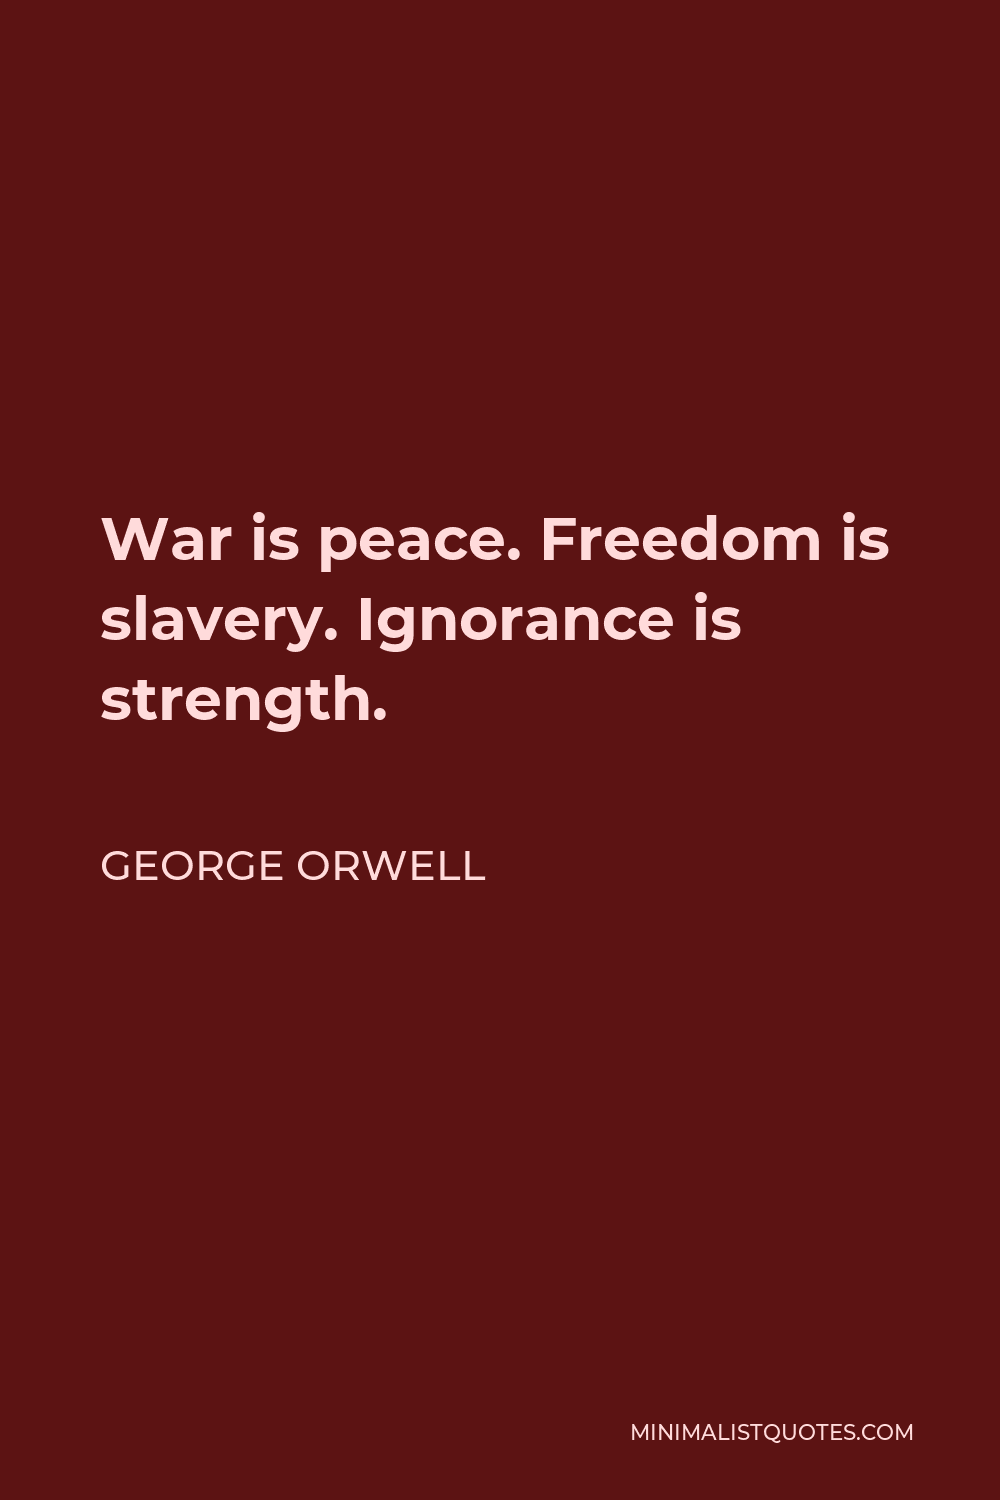 George Orwell Quote - War is peace. Freedom is slavery. Ignorance is strength.